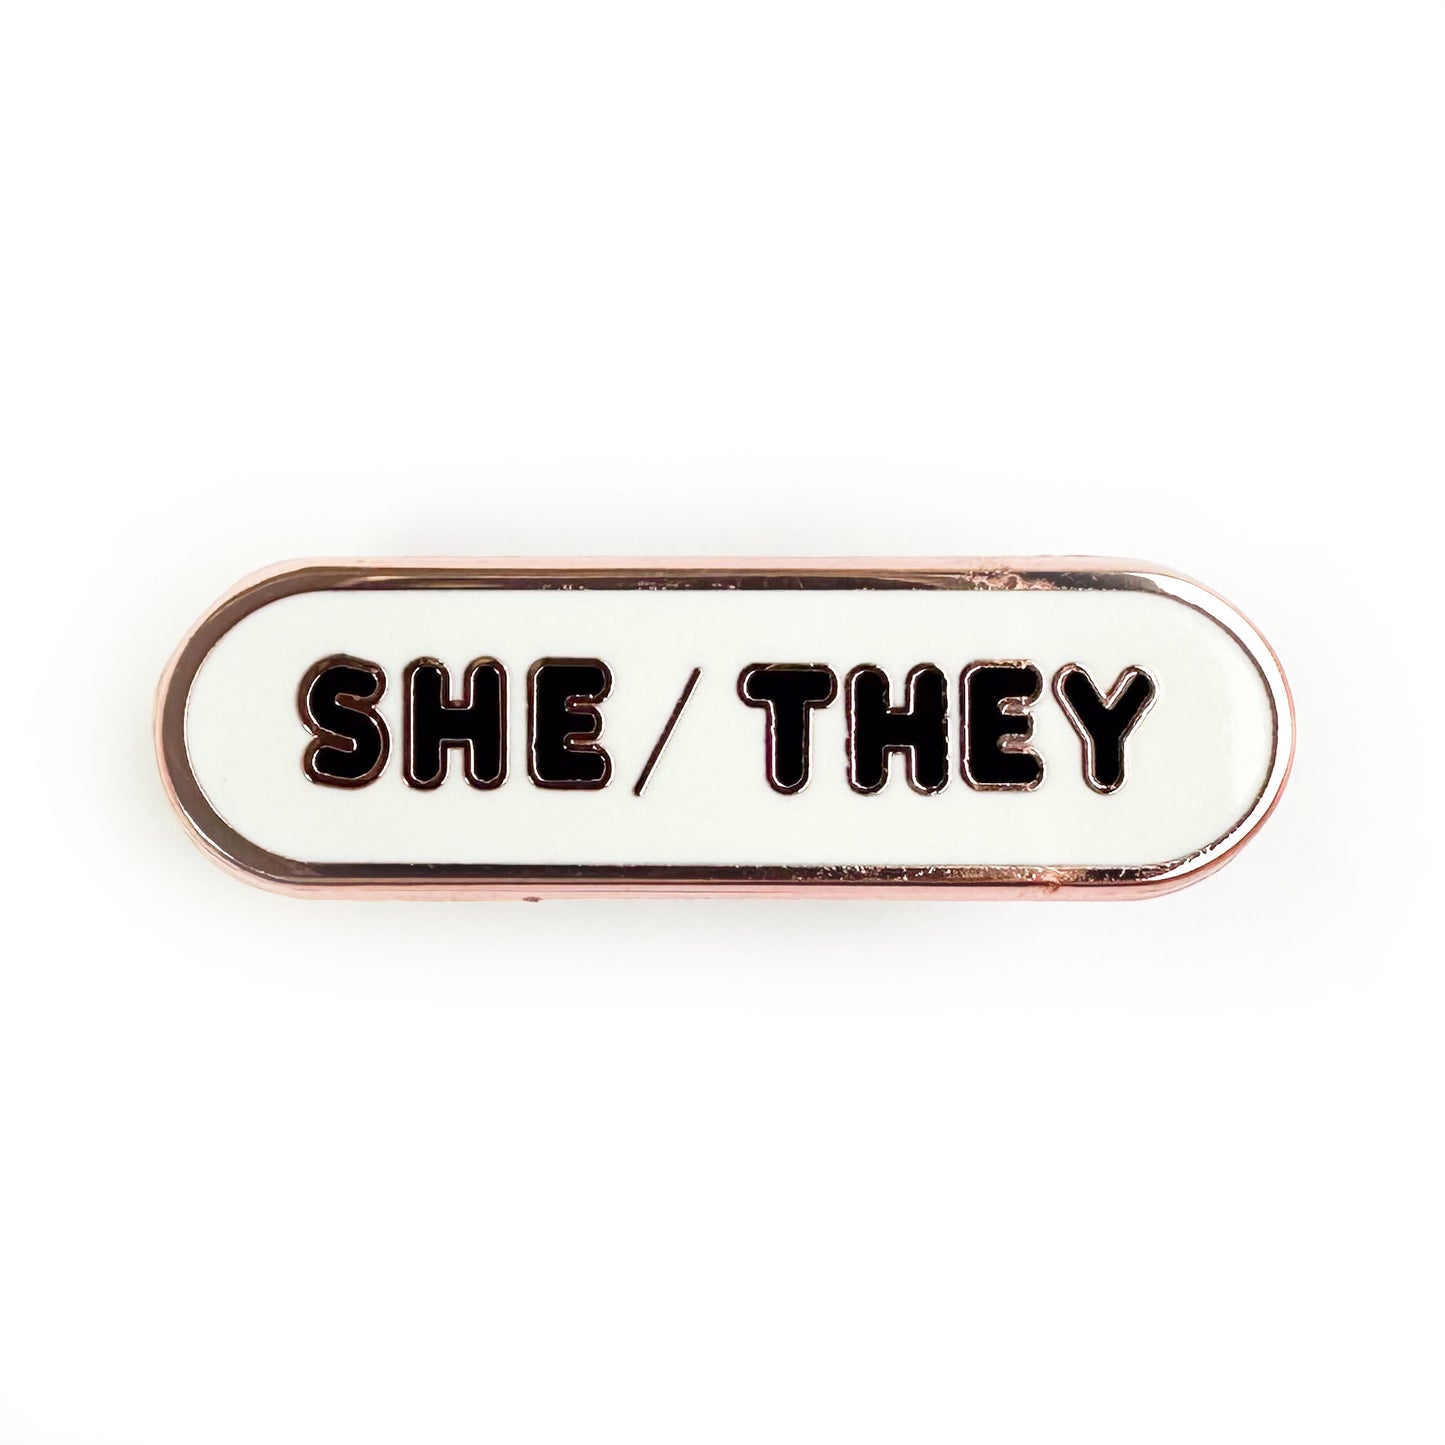 A pin with bubble letters that spell the pronouns "She/They" on it. 